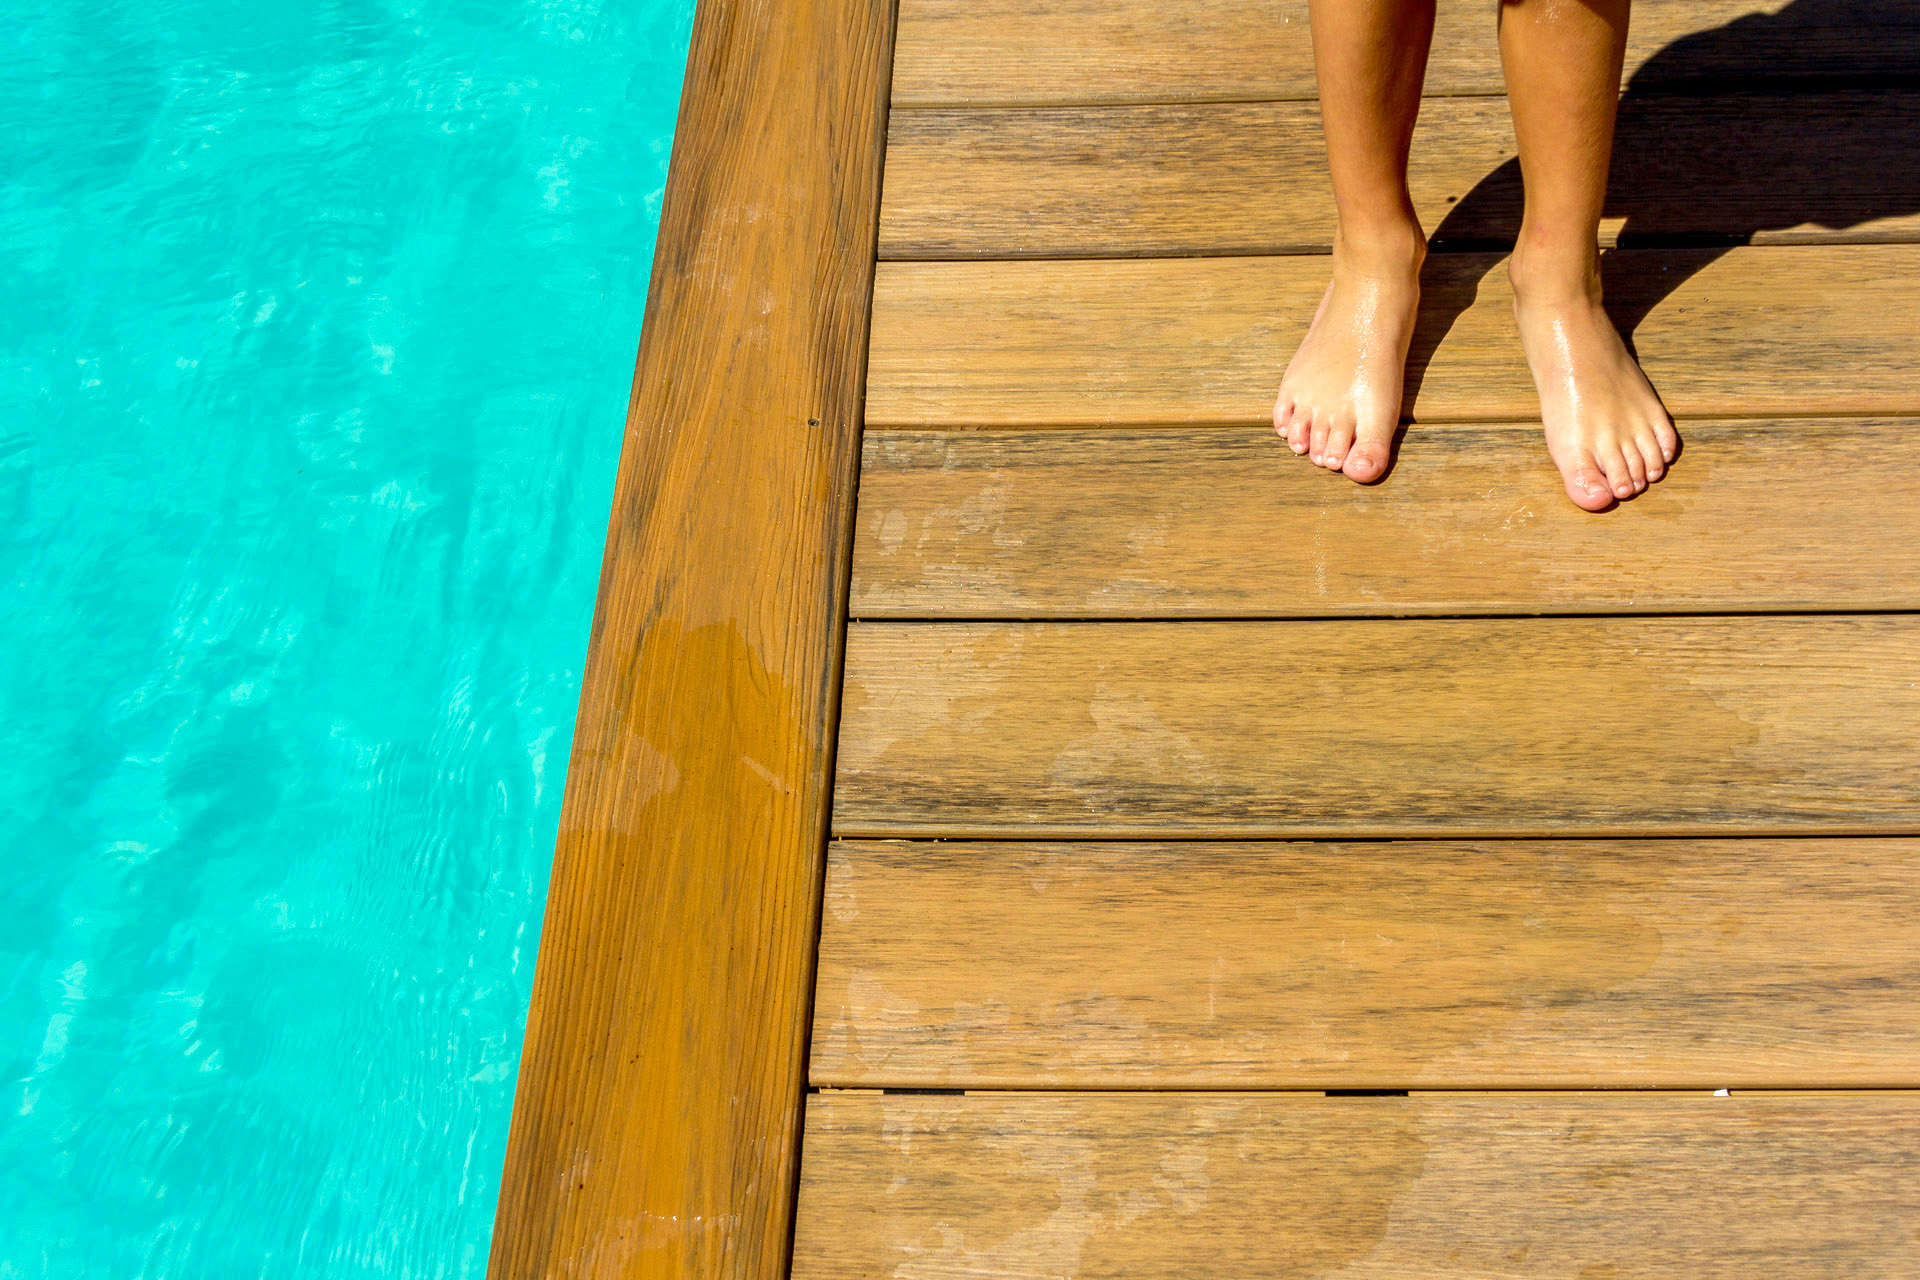 Wet feet standing poolside on composite decking